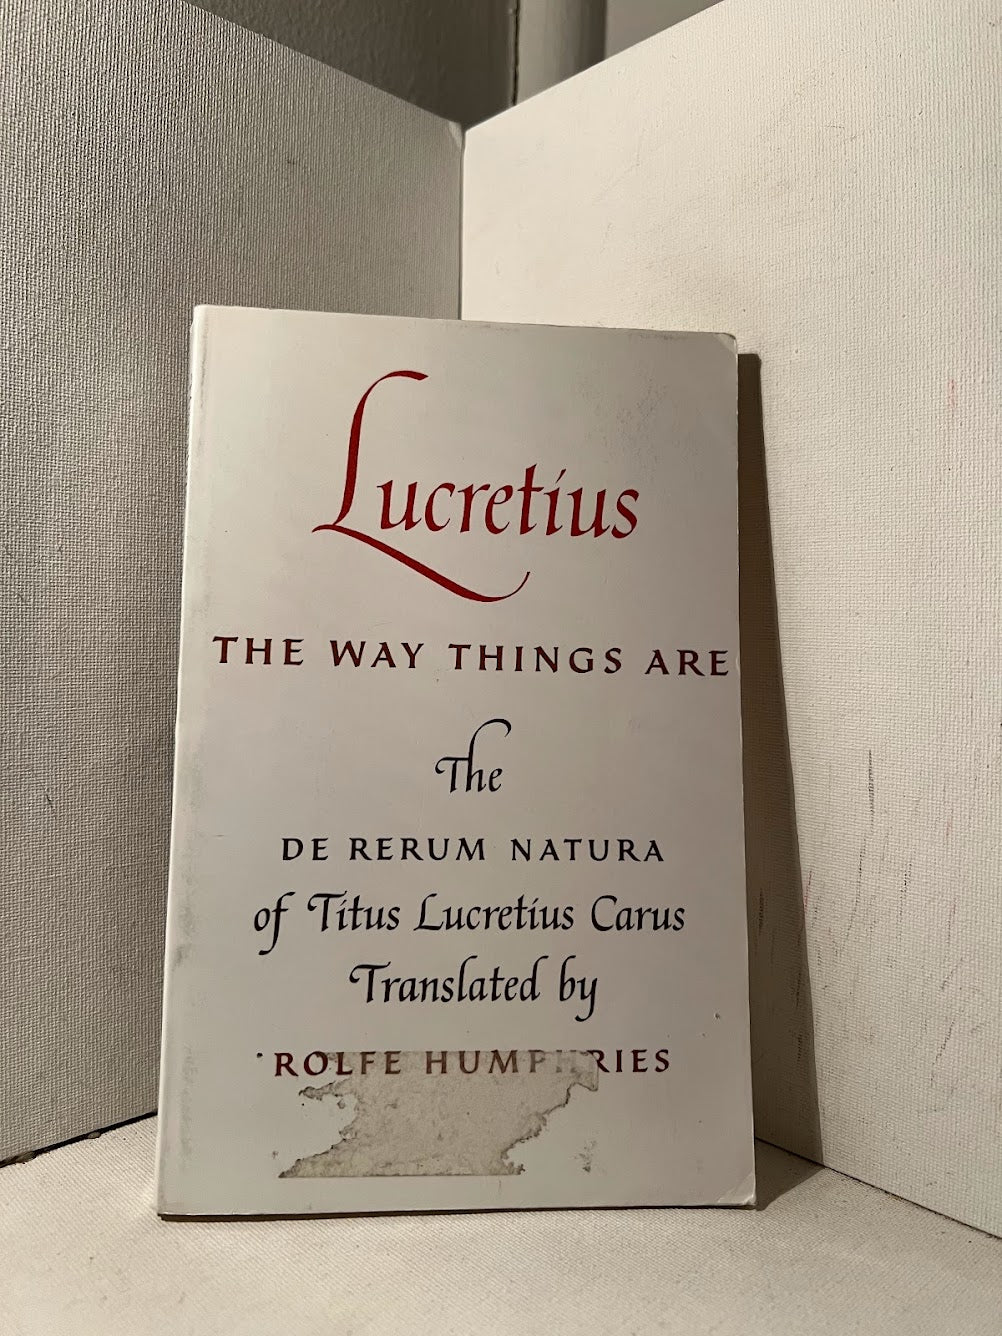 The Way Things Are by Lucretius